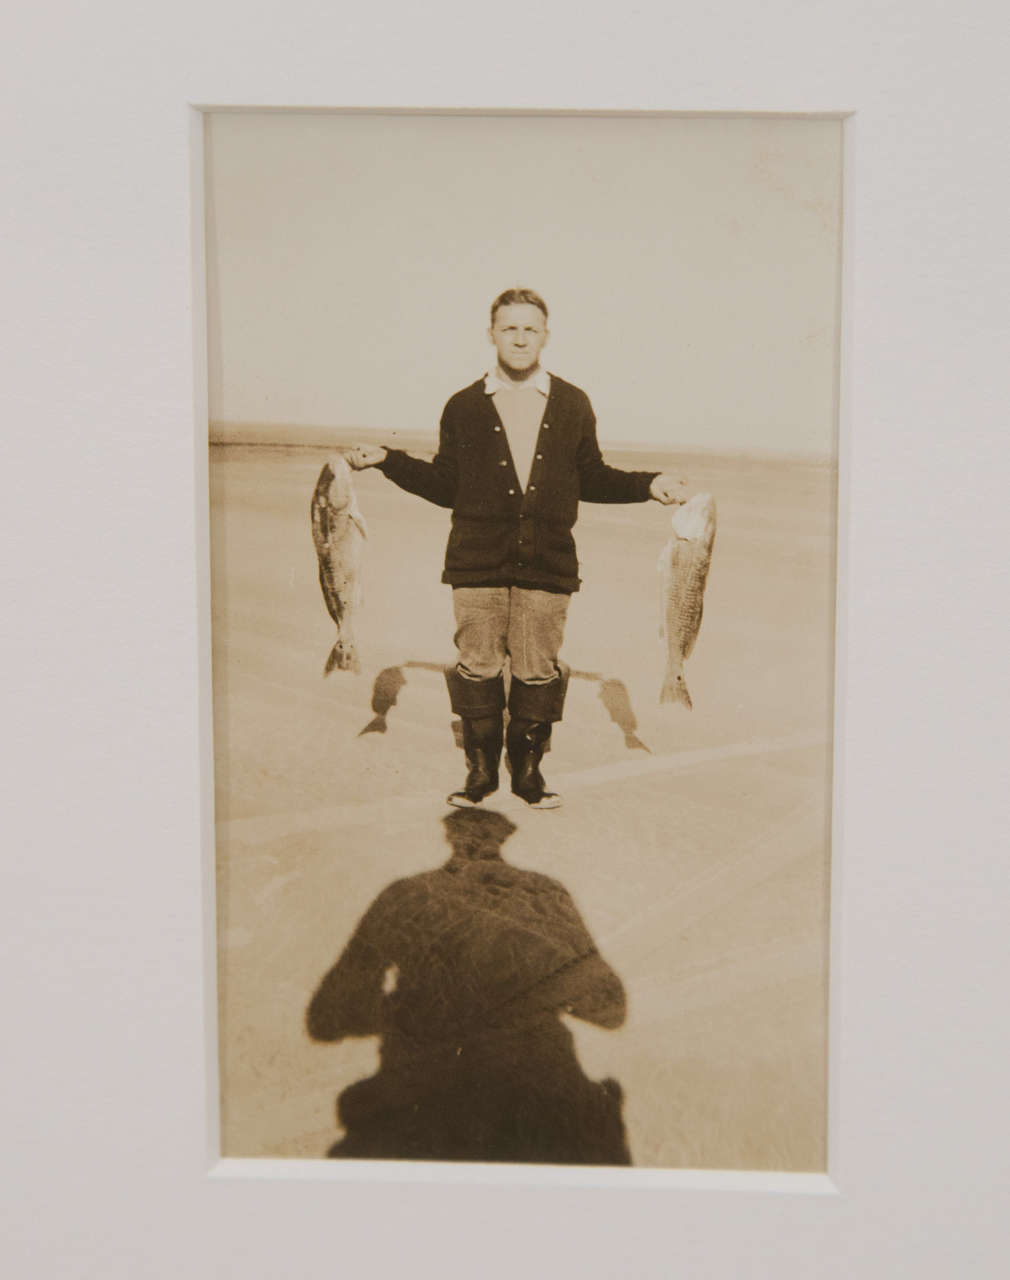 American, 1940s fishing trophy photograph.